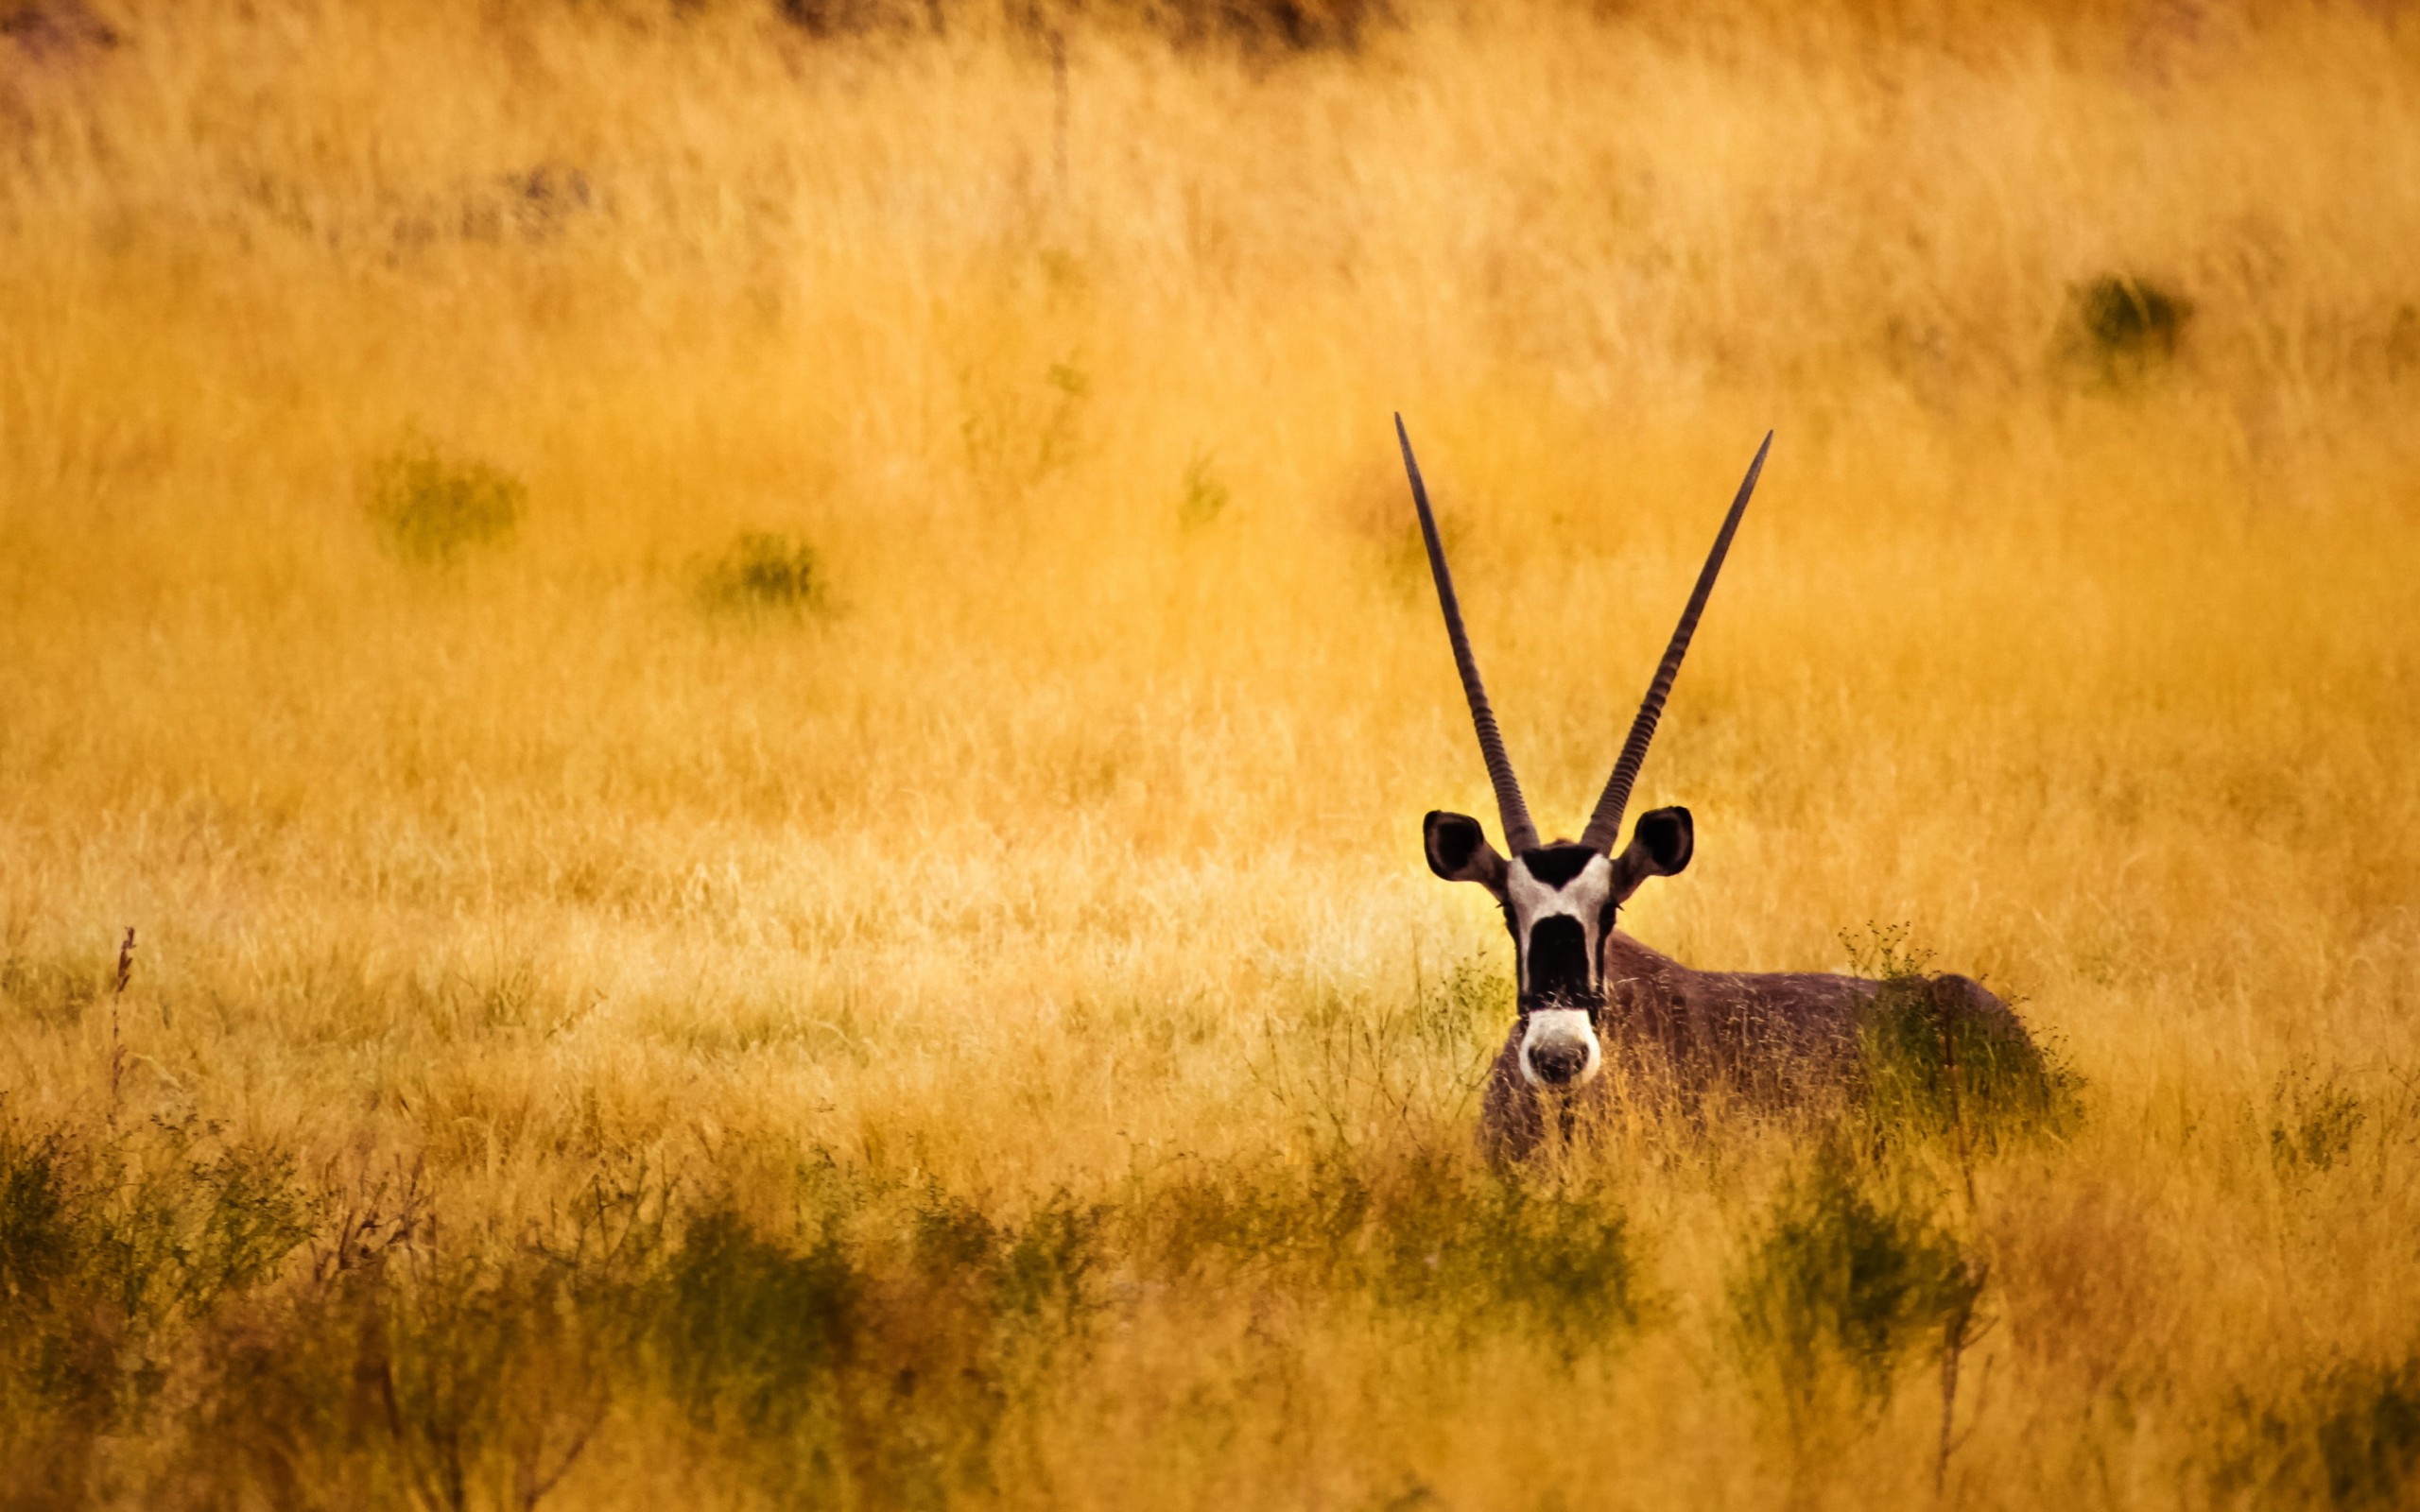 Download Antelope In The Savanna HD wallpaper for 2560 x 1600